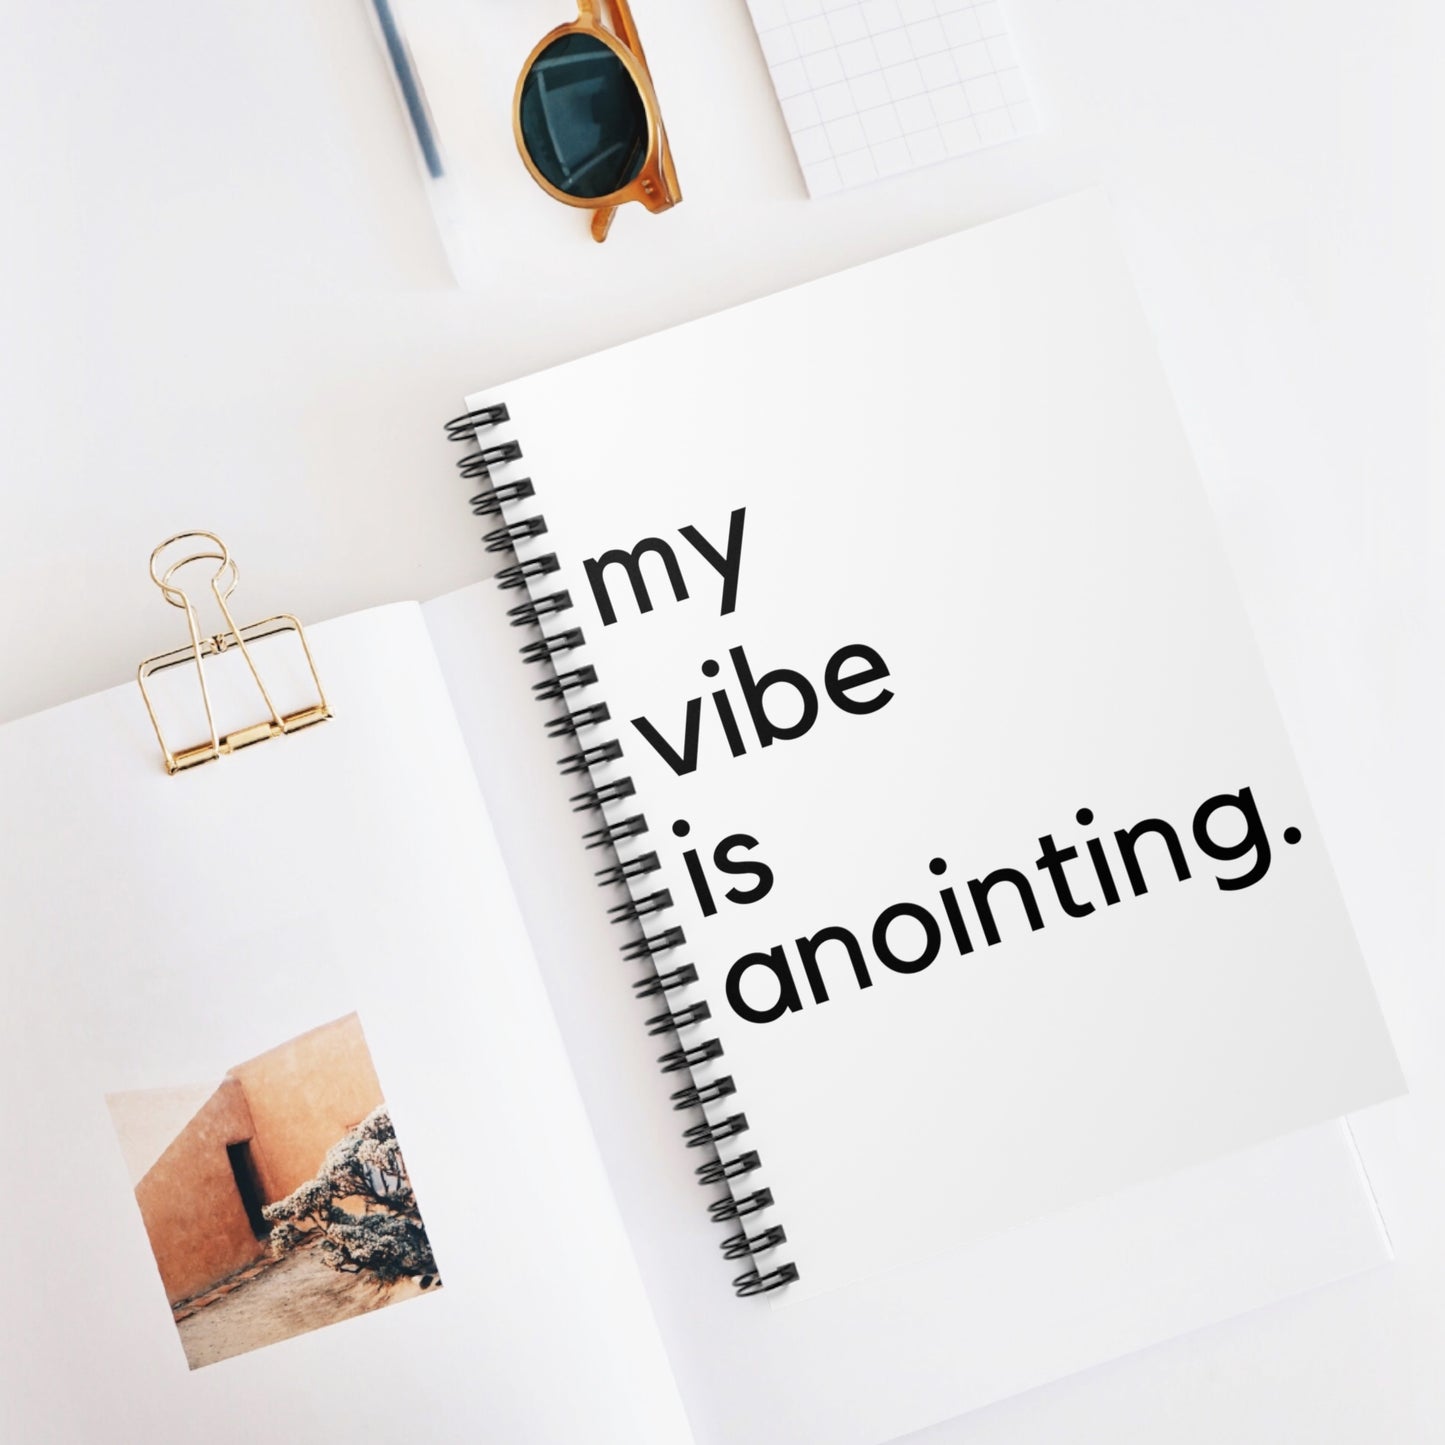 My Vibe is Anointing Spiral Notebook - Ruled Line